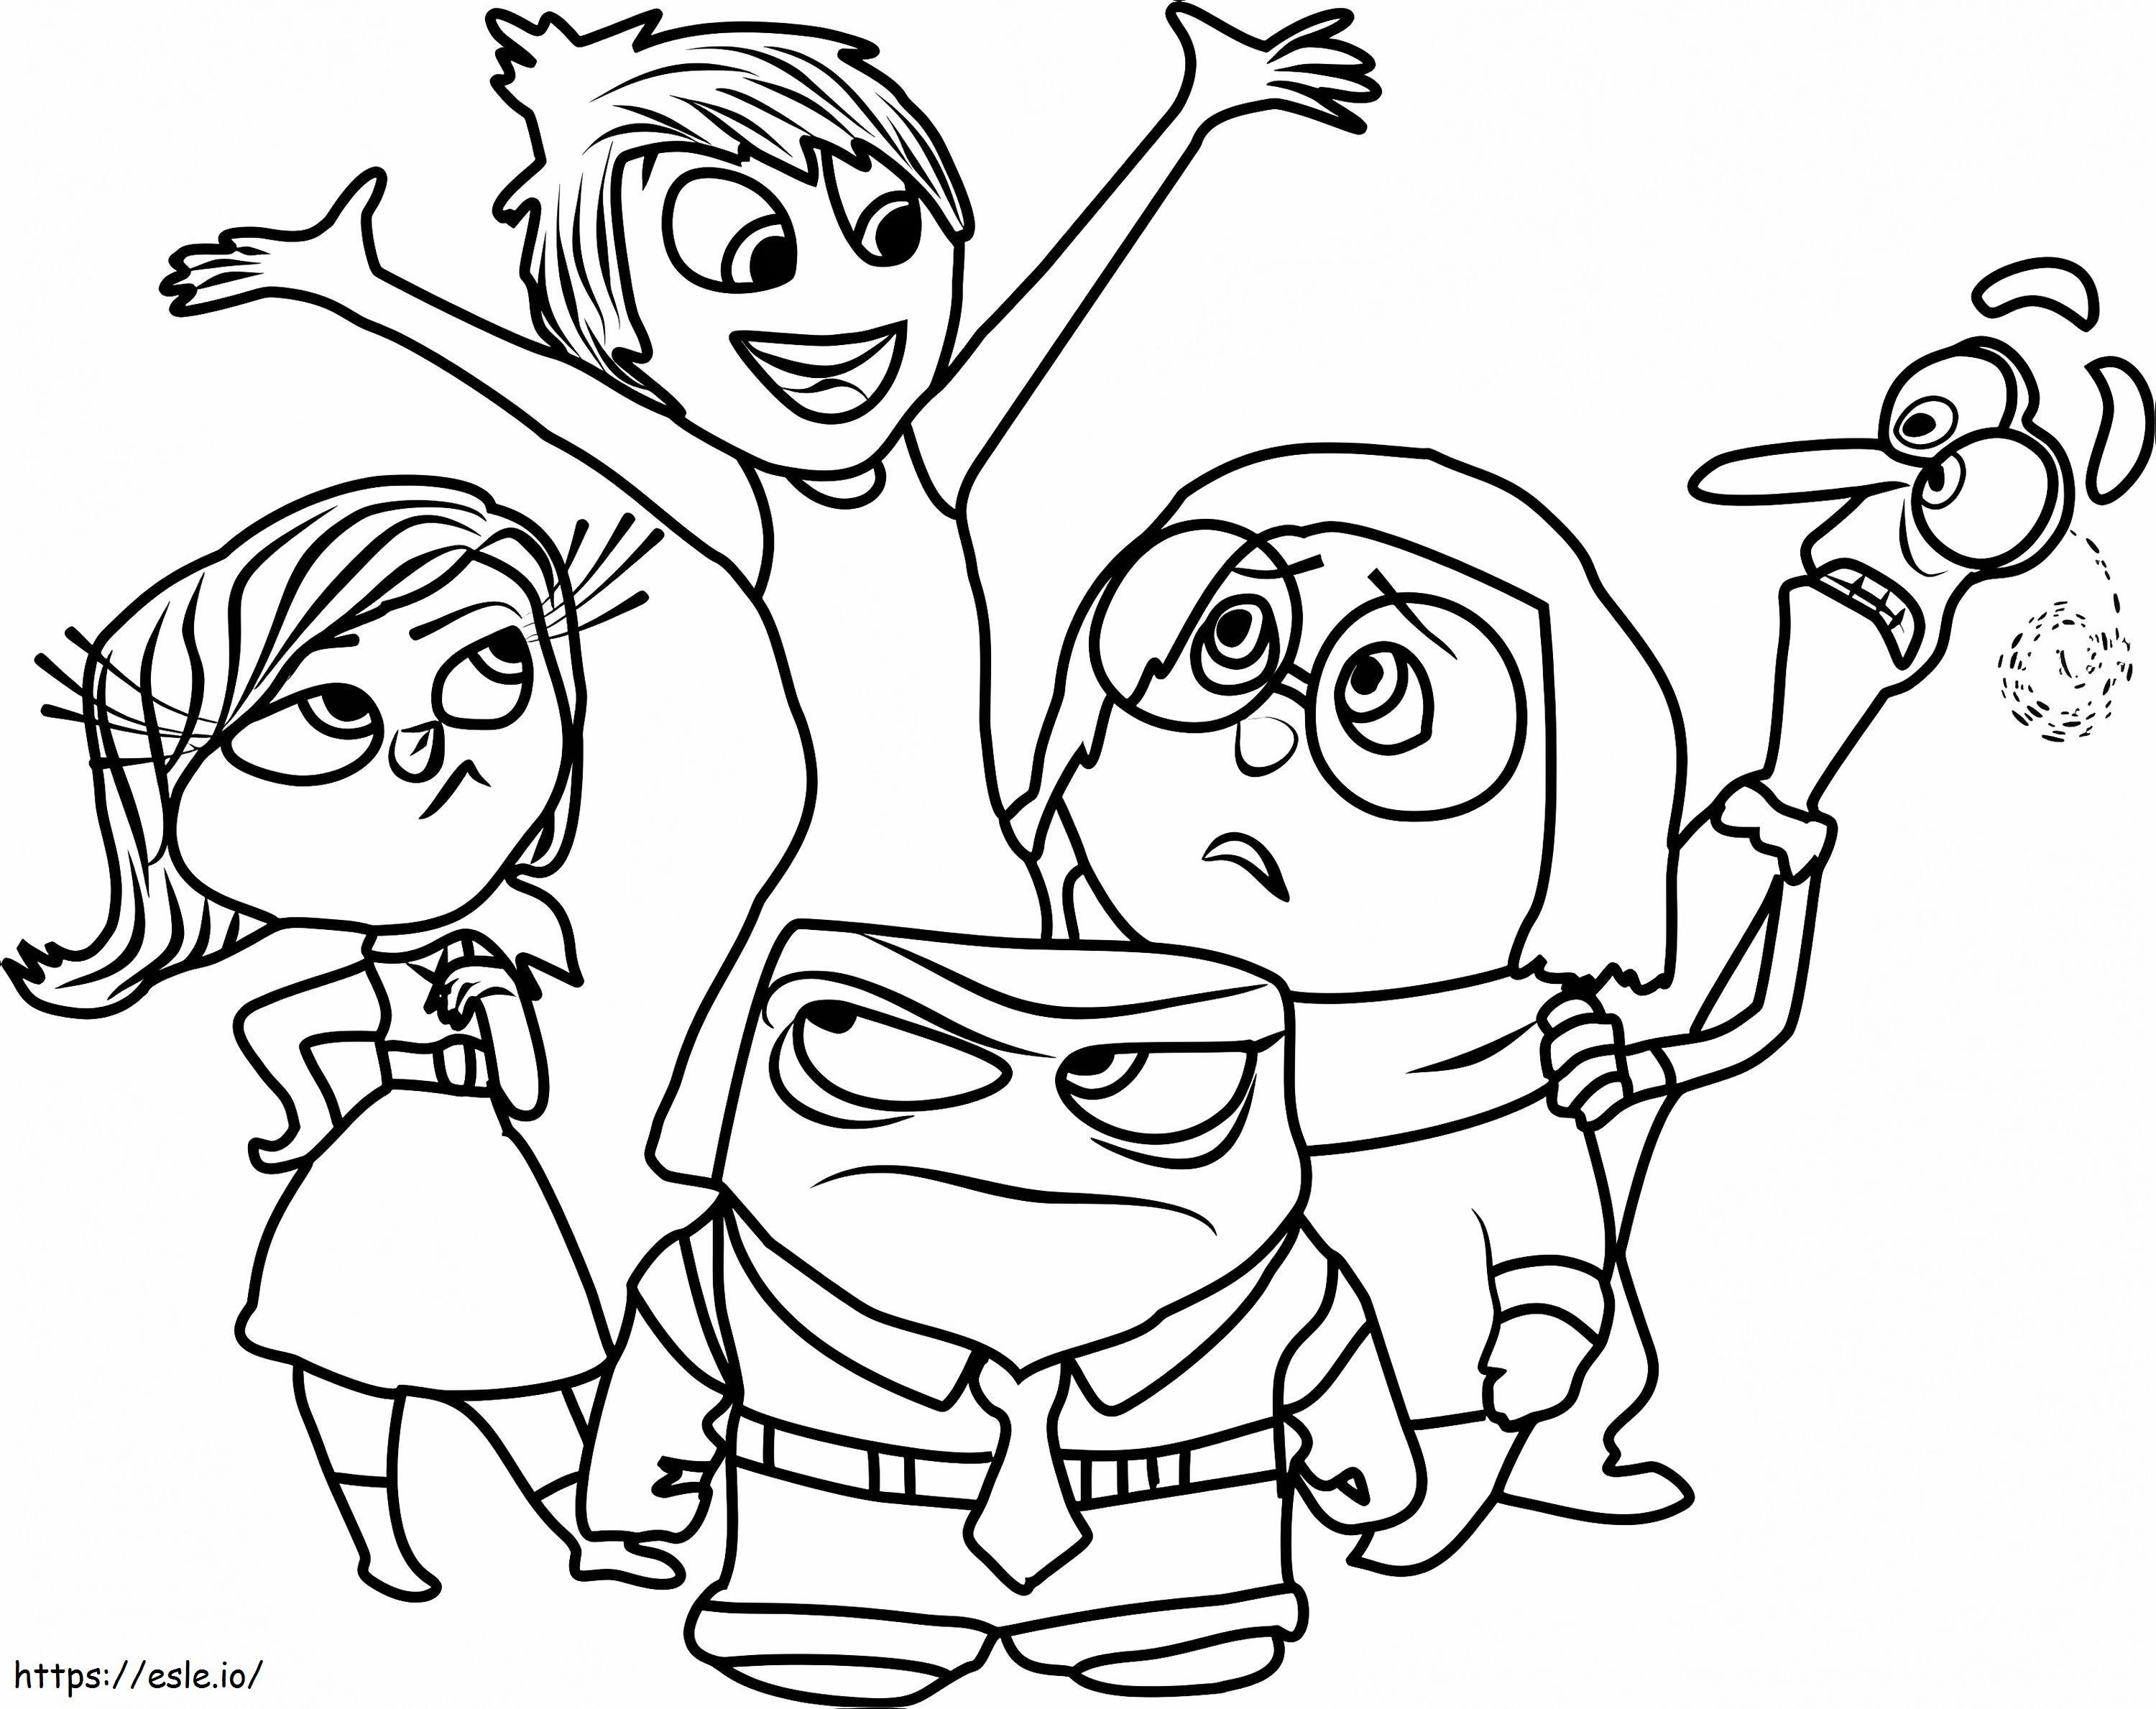 1532483387 Inside Out Team A4 E1600332621676 coloring page